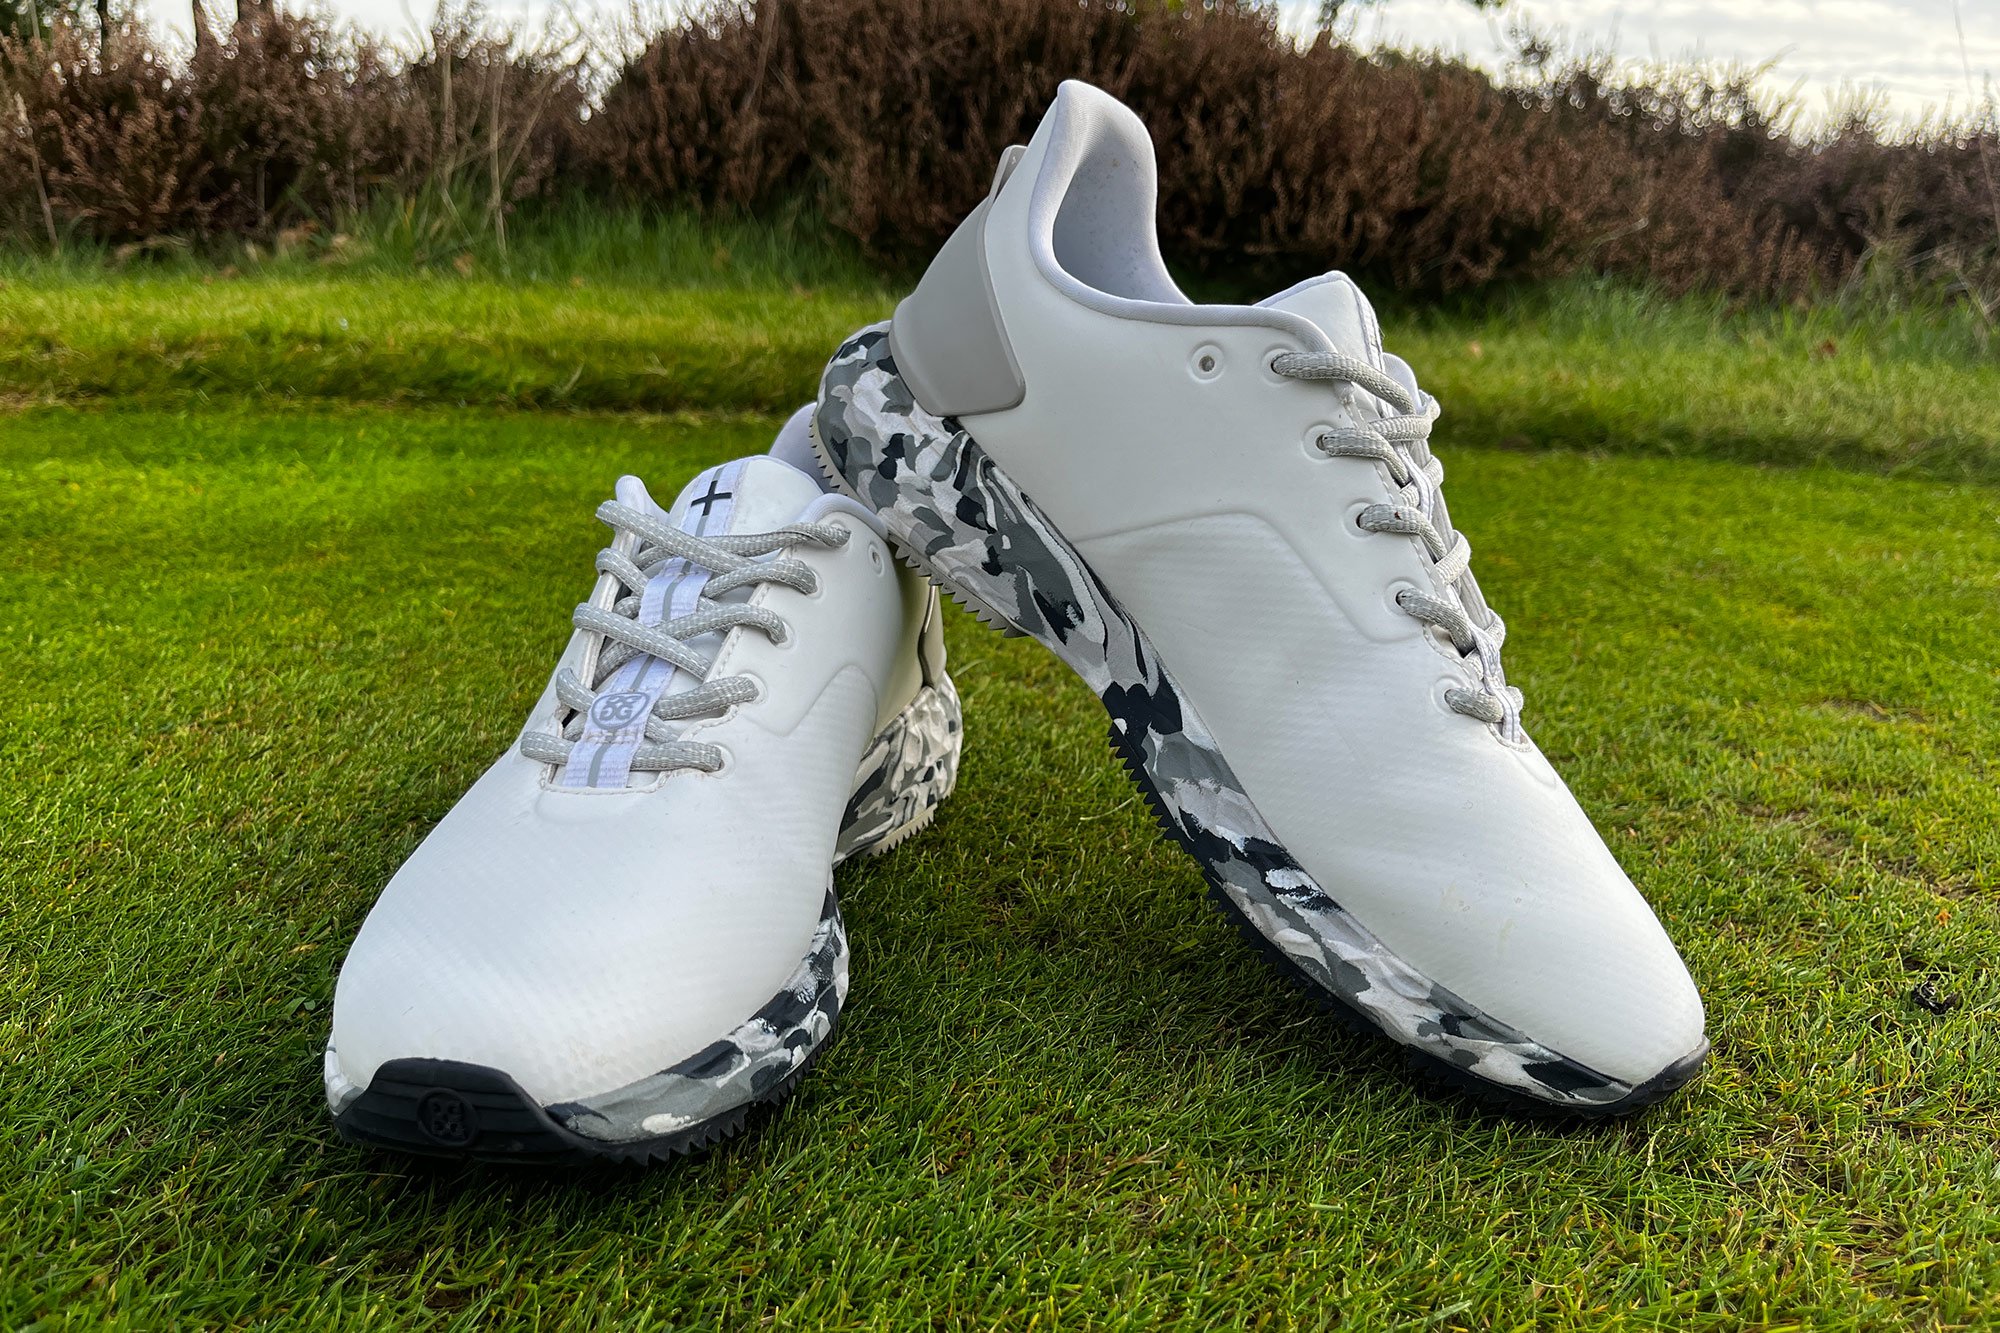 G Fore MG4+ golf shoes review